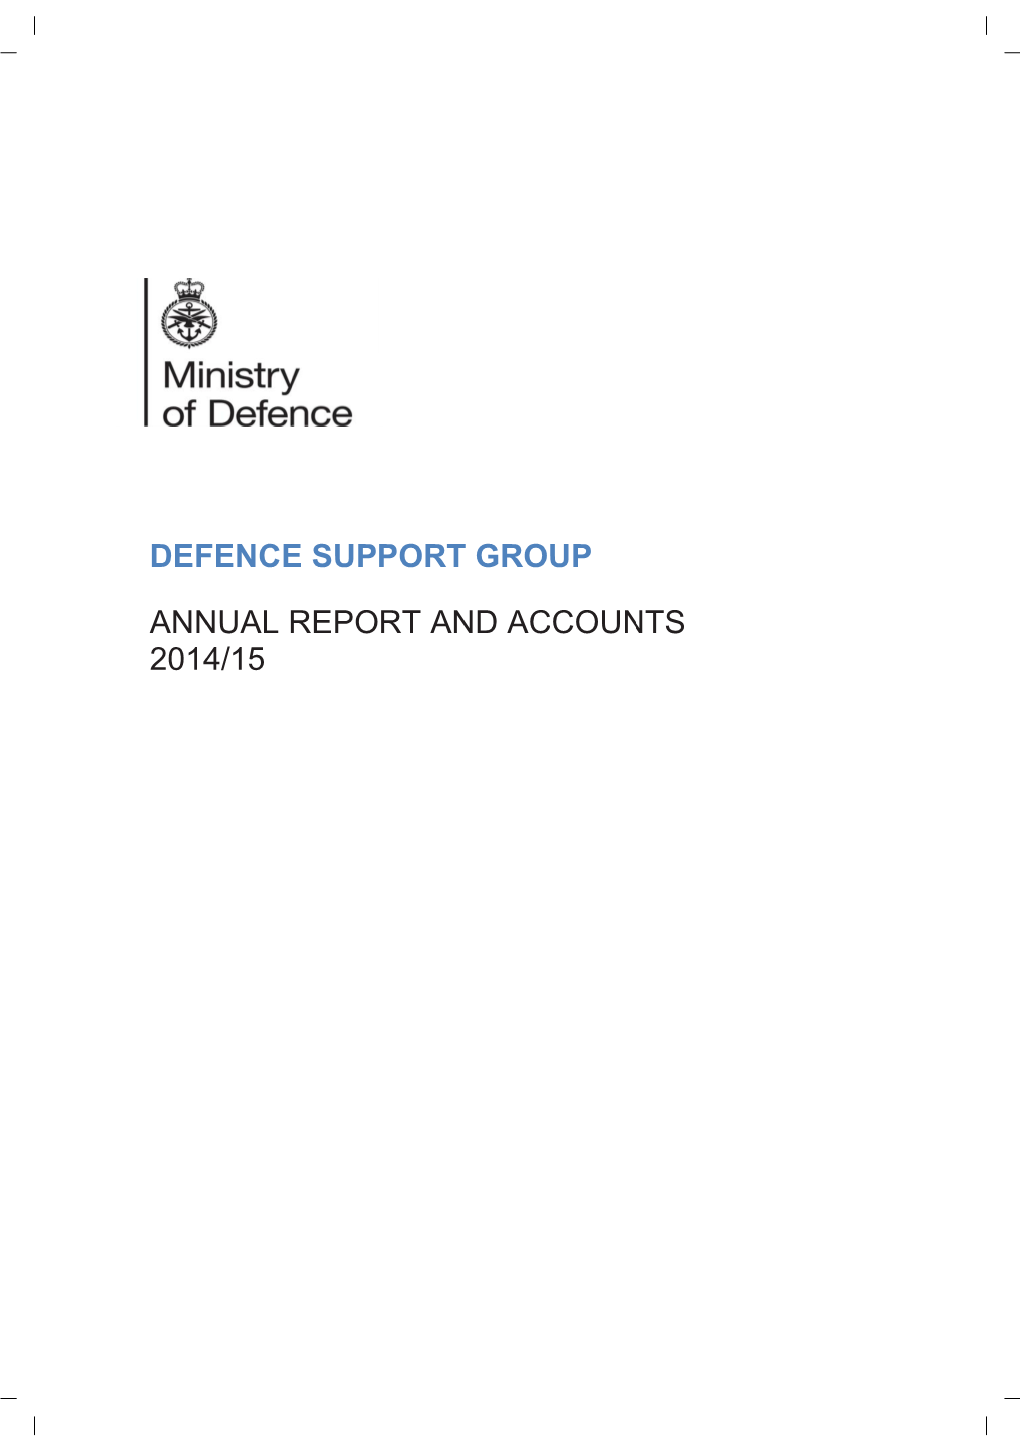 Defence Support Group Annual Report and Accounts 2014 to 2015